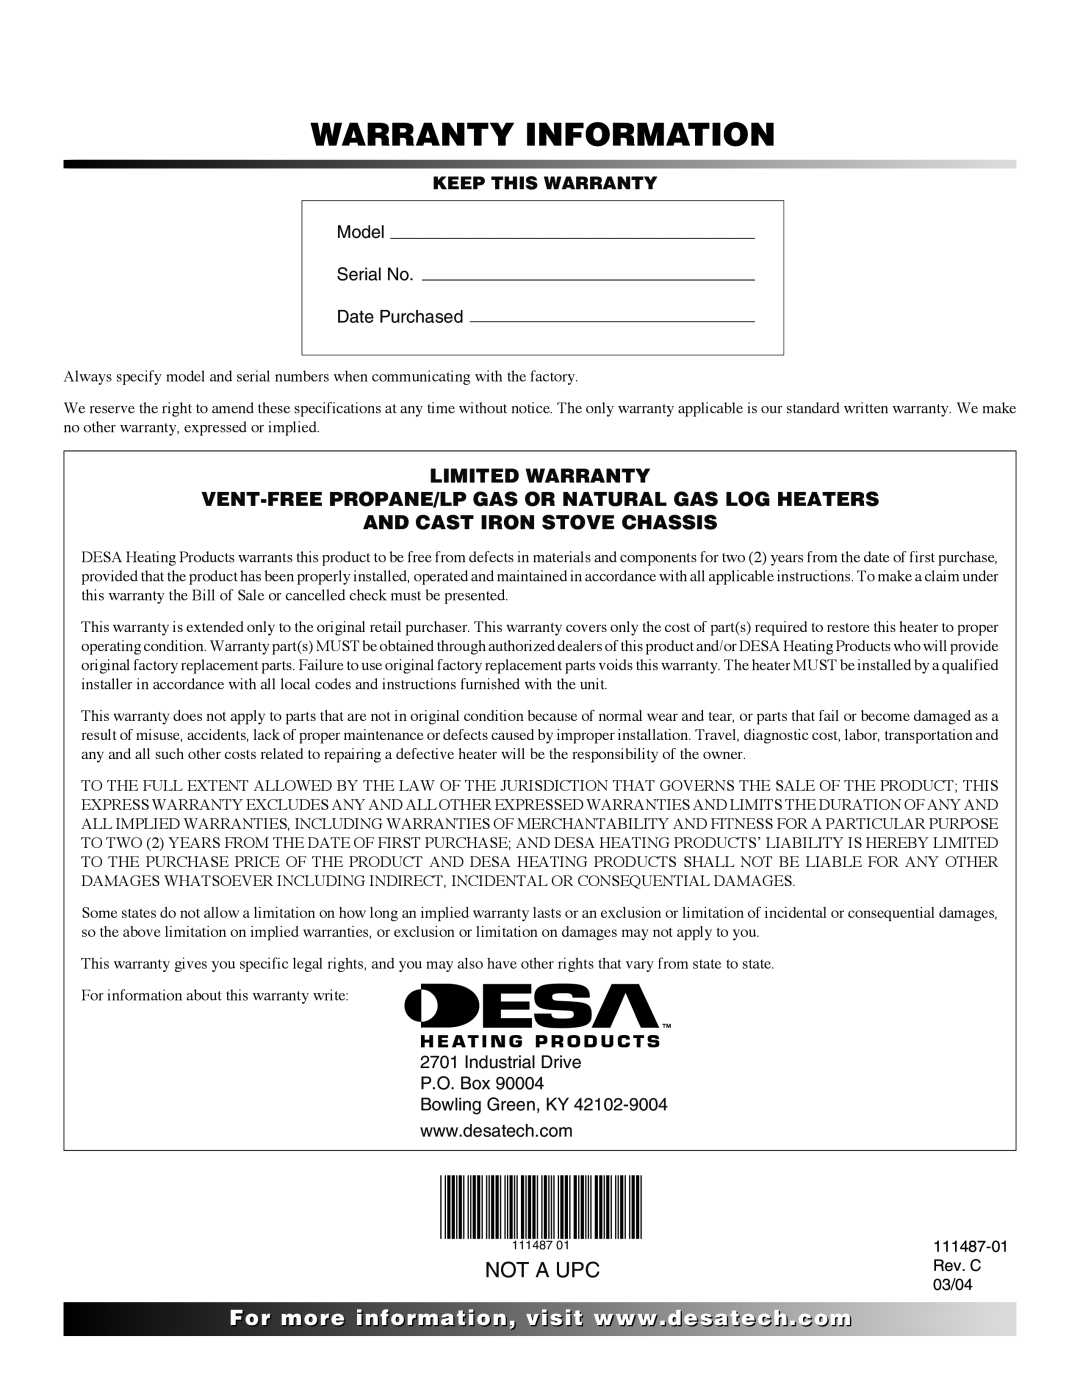 Desa CSBNT Not A Upc, Warranty Information, For..com, Limited Warranty Vent-Free Propane/Lp Gas Or Natural Gas Log Heaters 